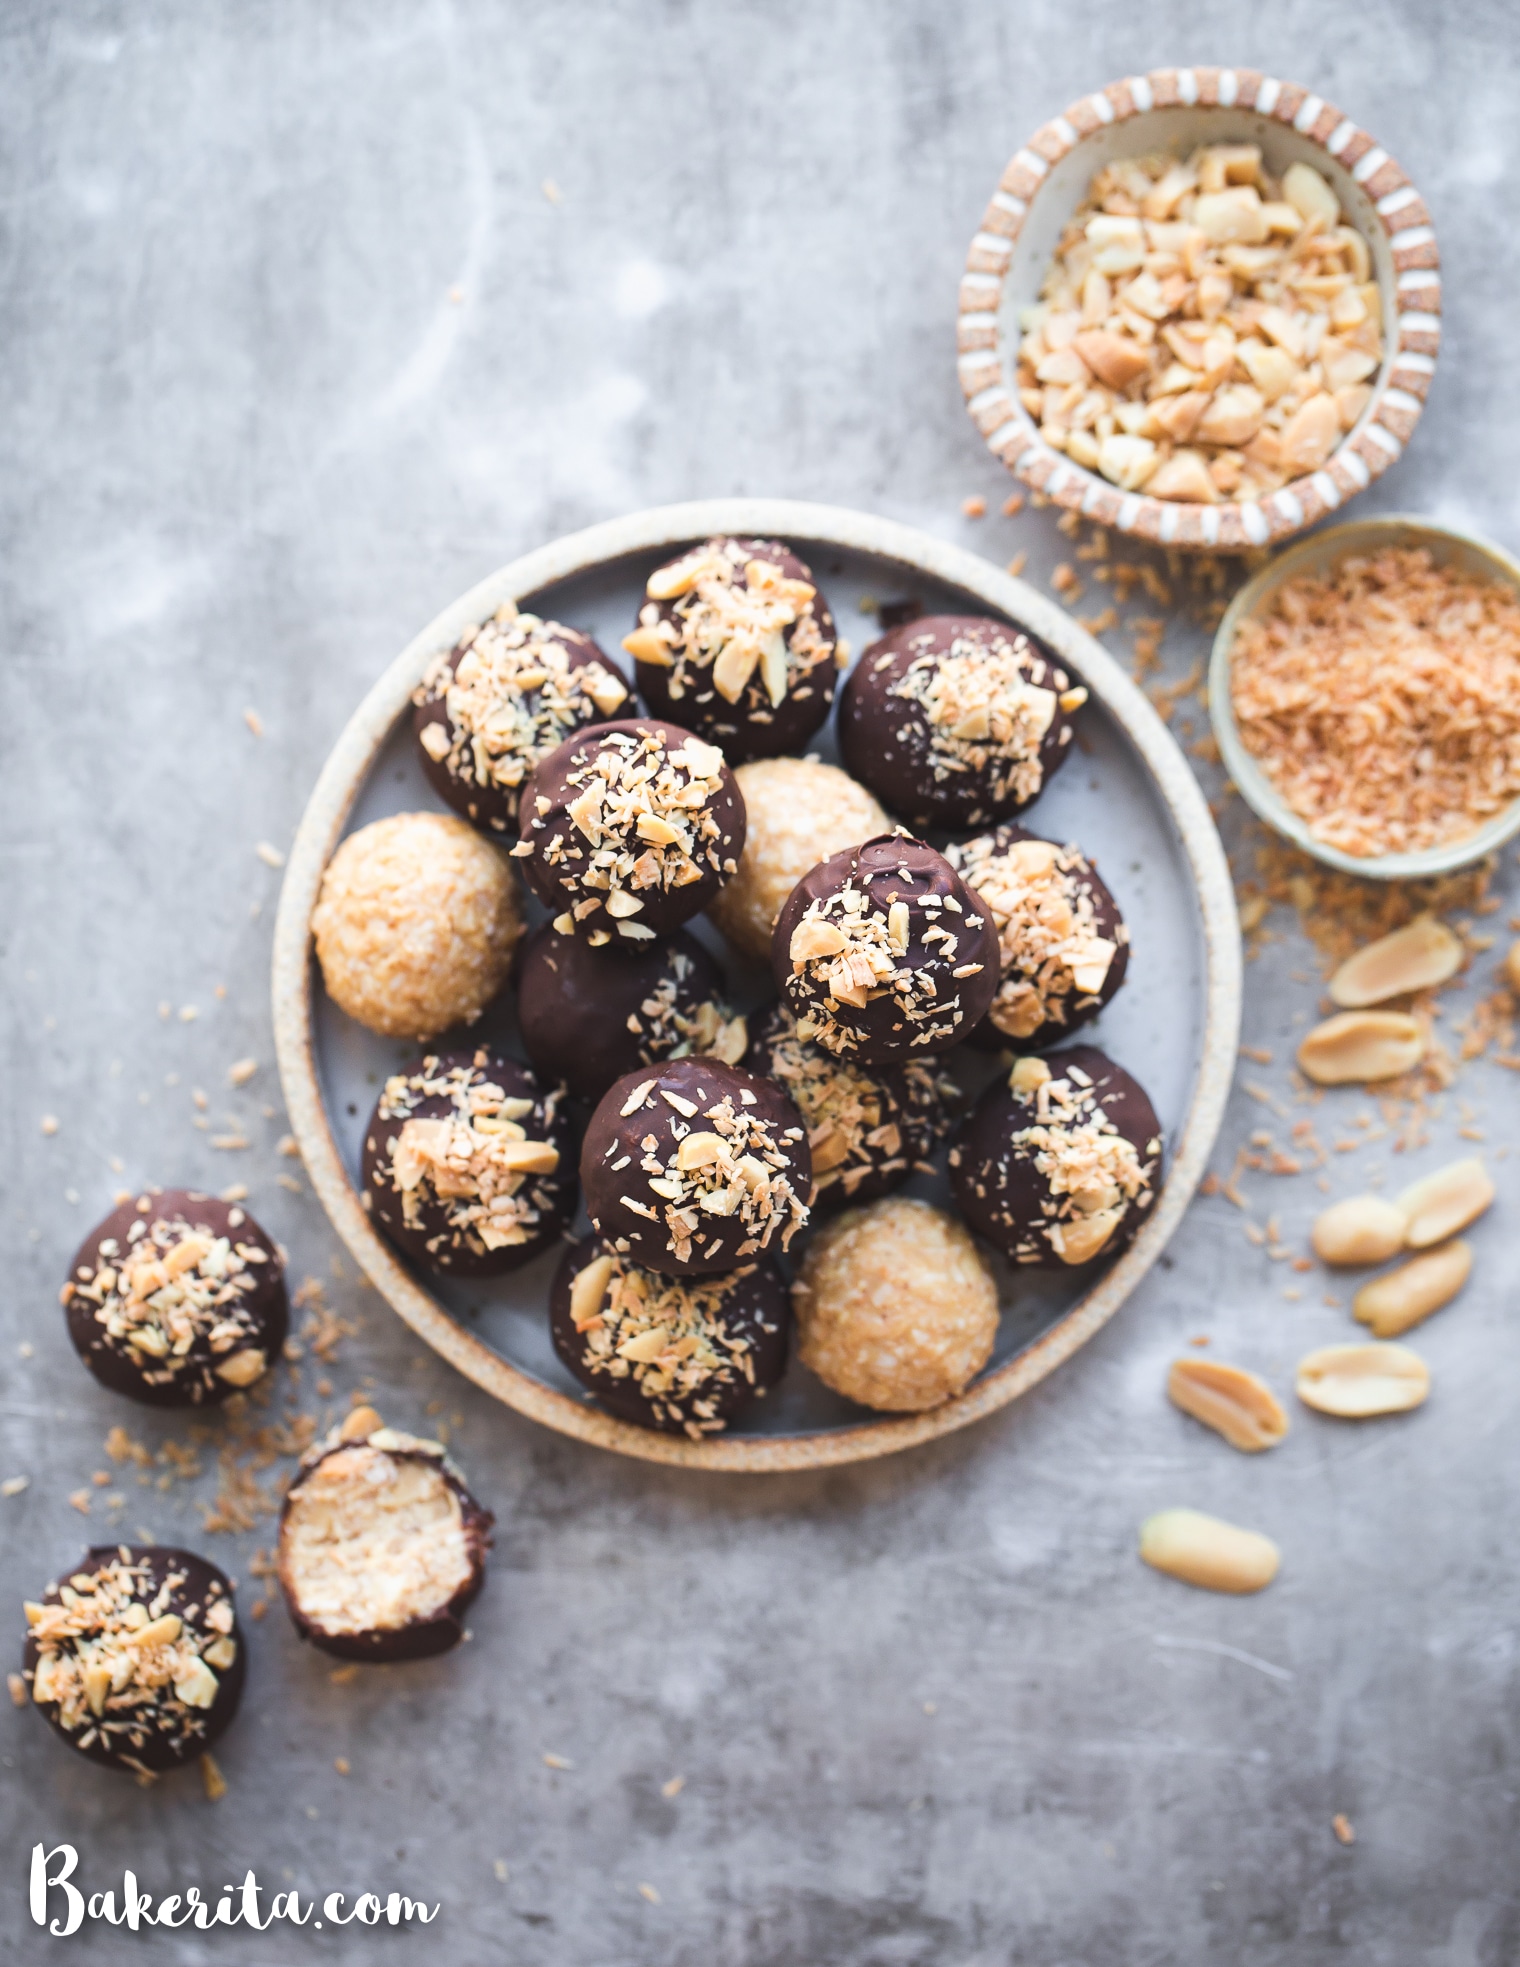 Peanut Butter Coconut Truffles are made with just 6 simple ingredients and are infinitely customizable to your tastes! With a thin chocolate coating and a melt-in-your-mouth texture, these gluten-free, vegan, and keto truffles will become your new favorite snack or dessert.